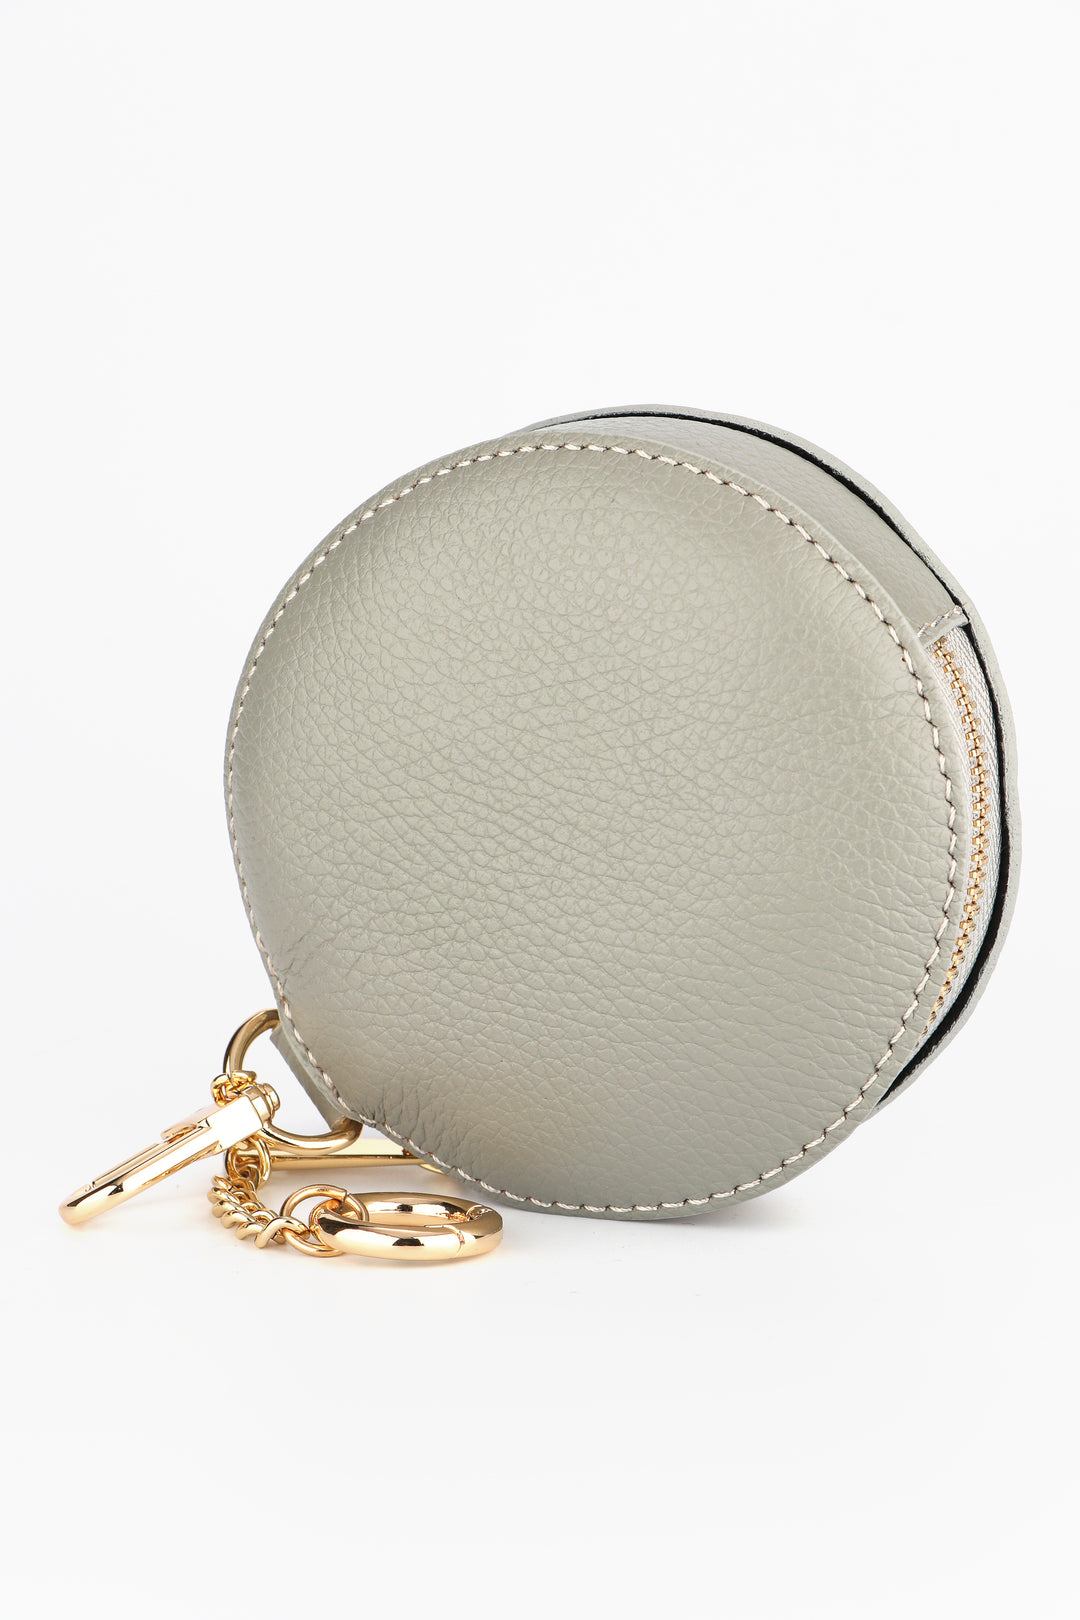 light grey round italian leather coin purse with a zip closure and two clip on keychains